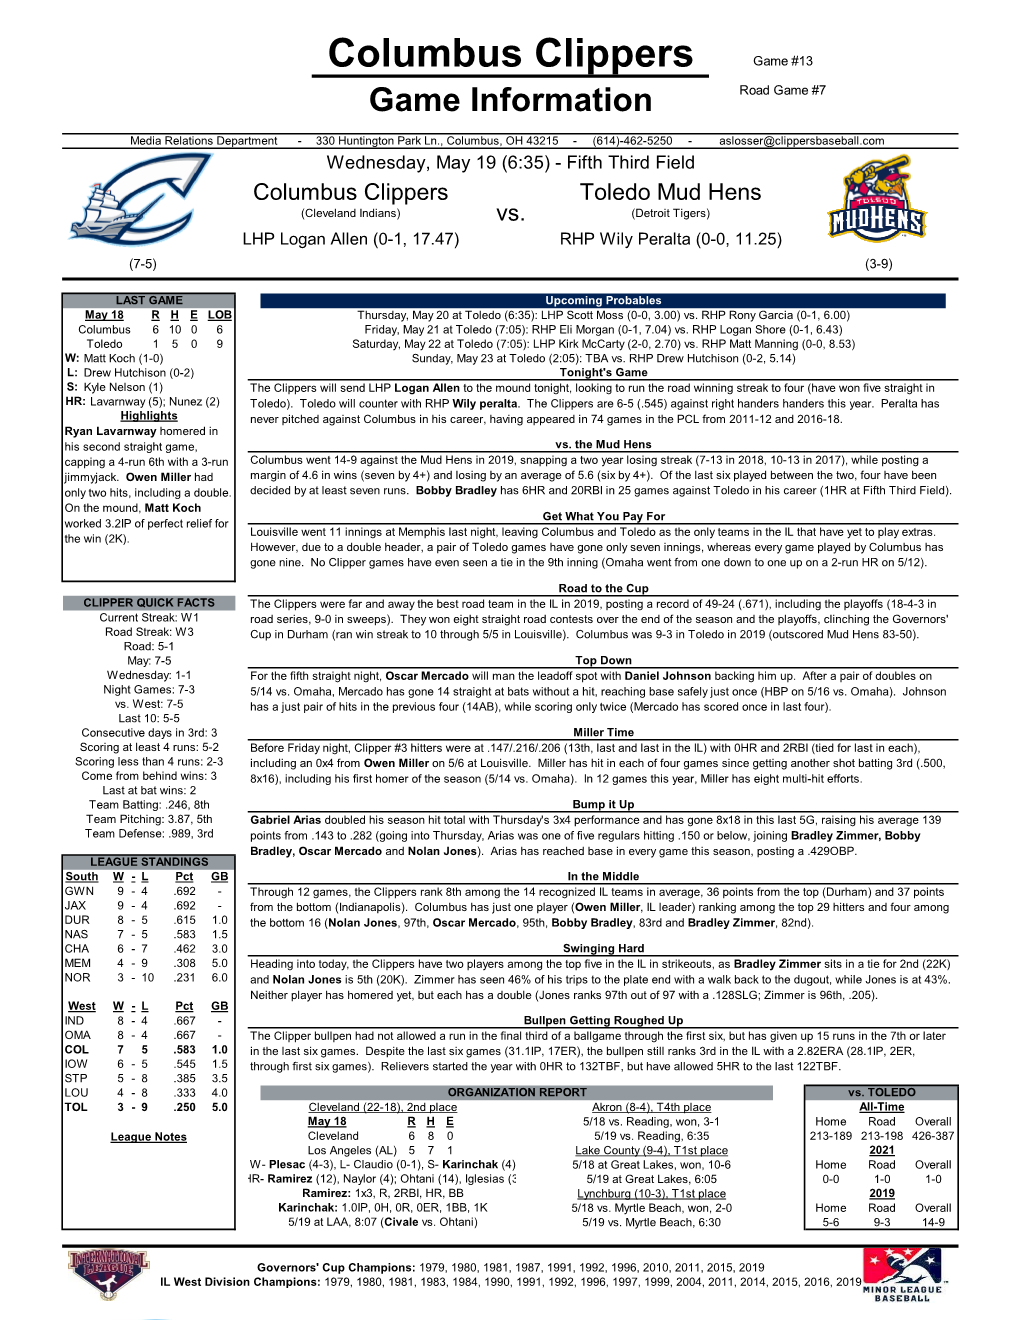 Columbus Clippers Game #13 Game Information Road Game #7